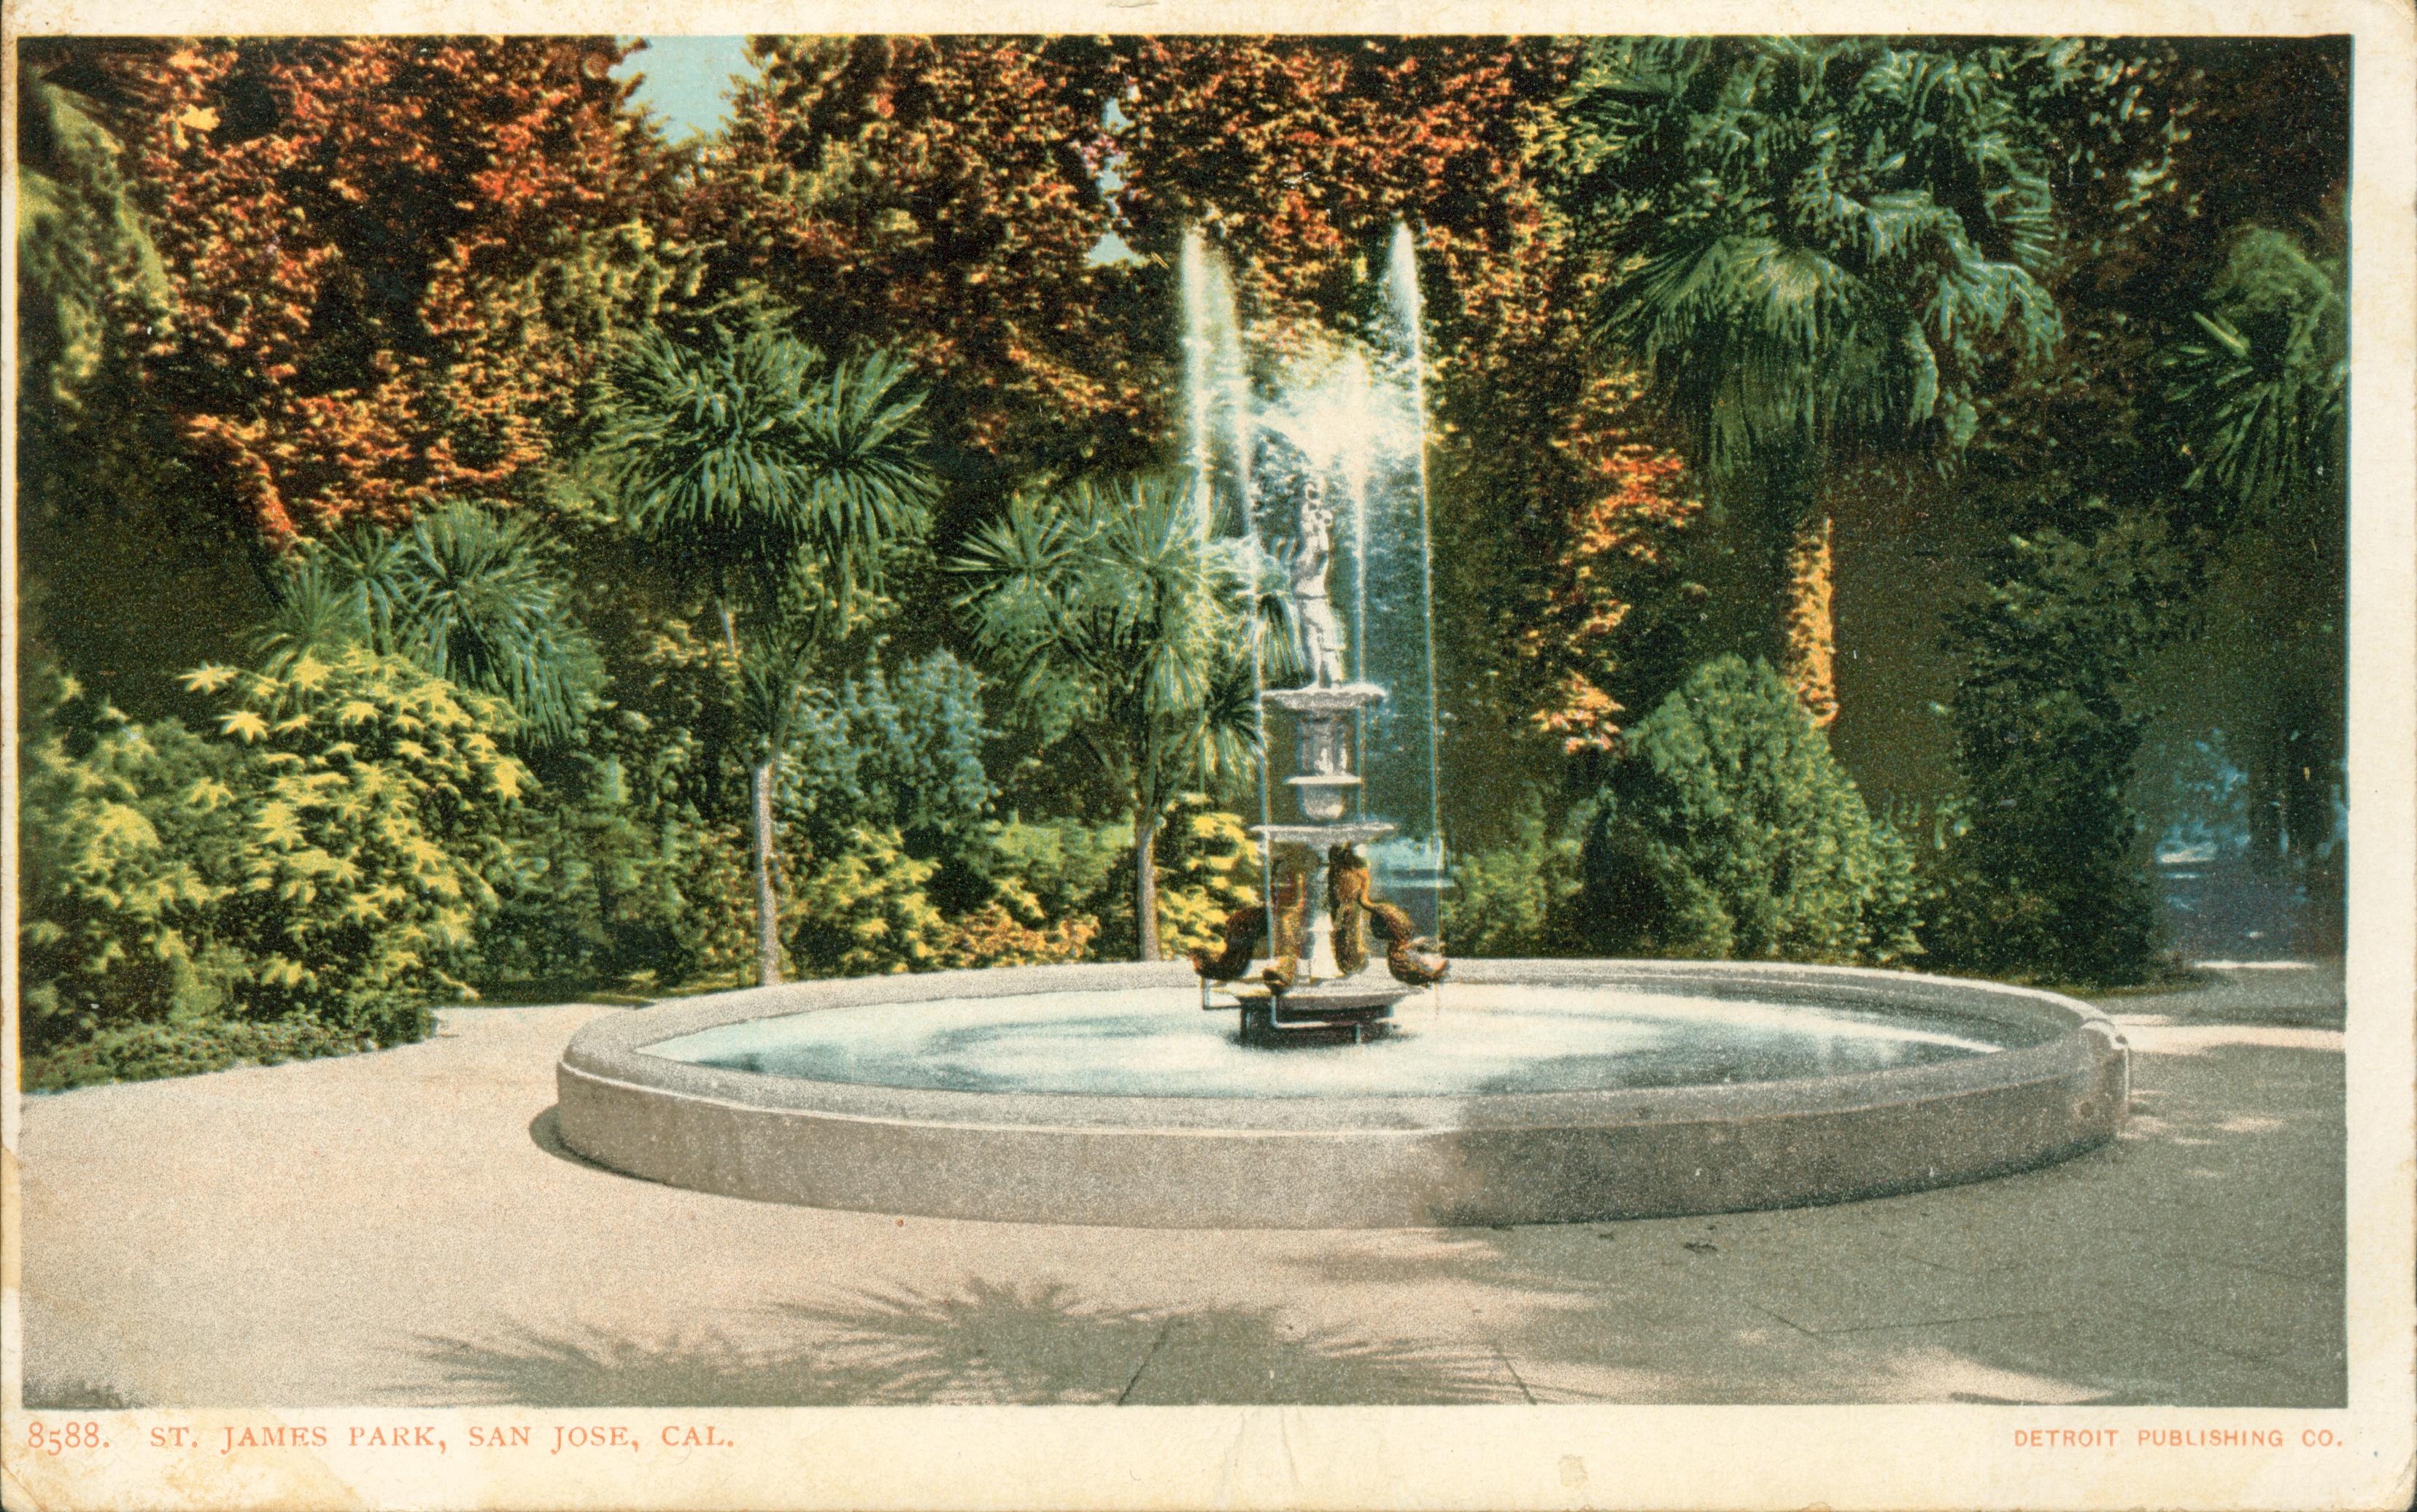 Fountain and gardens of St. James Park, San Jose, Ca